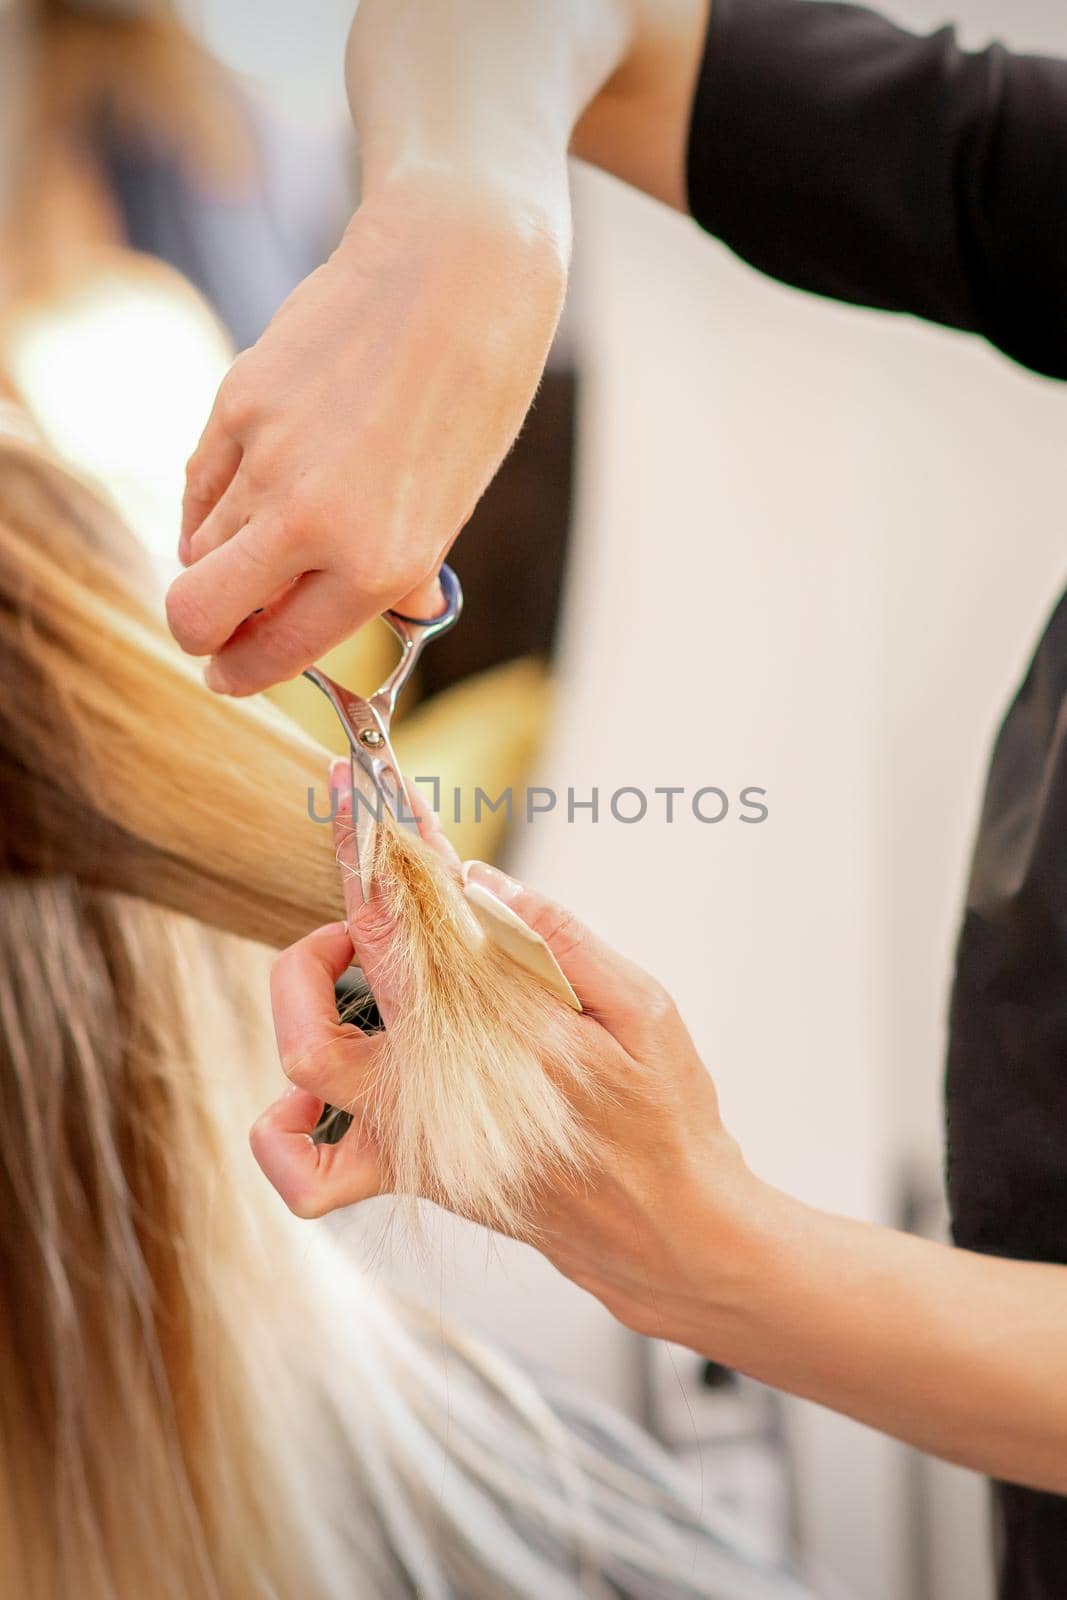 Cutting female blonde hair. Hairdresser cuts hair of a young caucasian woman in a beauty salon close up